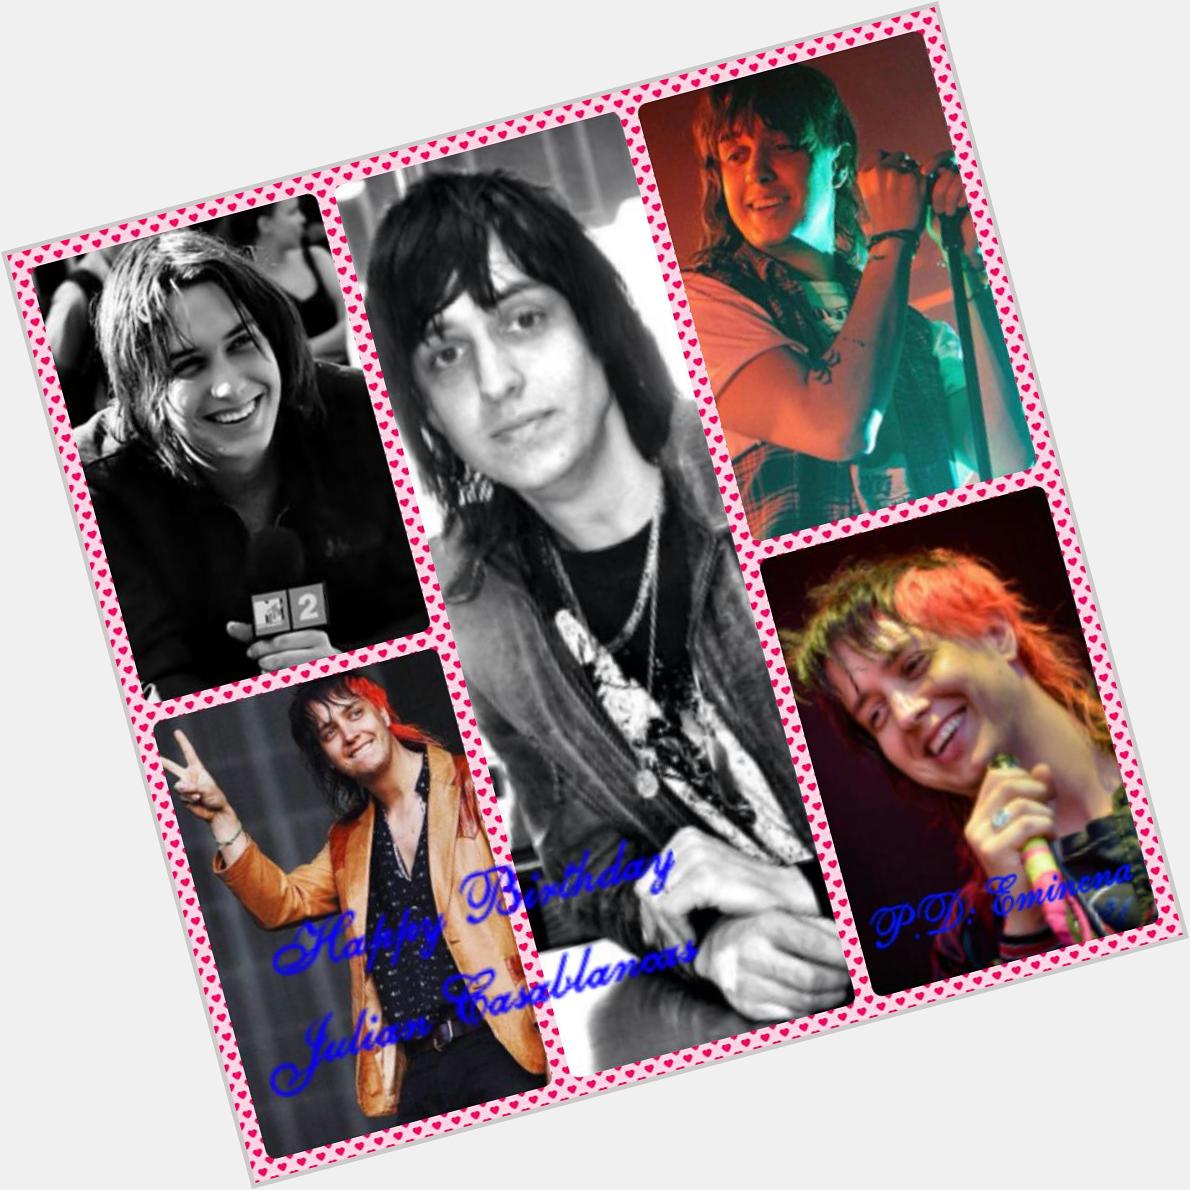  Eminena from Venezuela. Happy Birthday Julian Casablancas. Thanks for filling my life with your music 